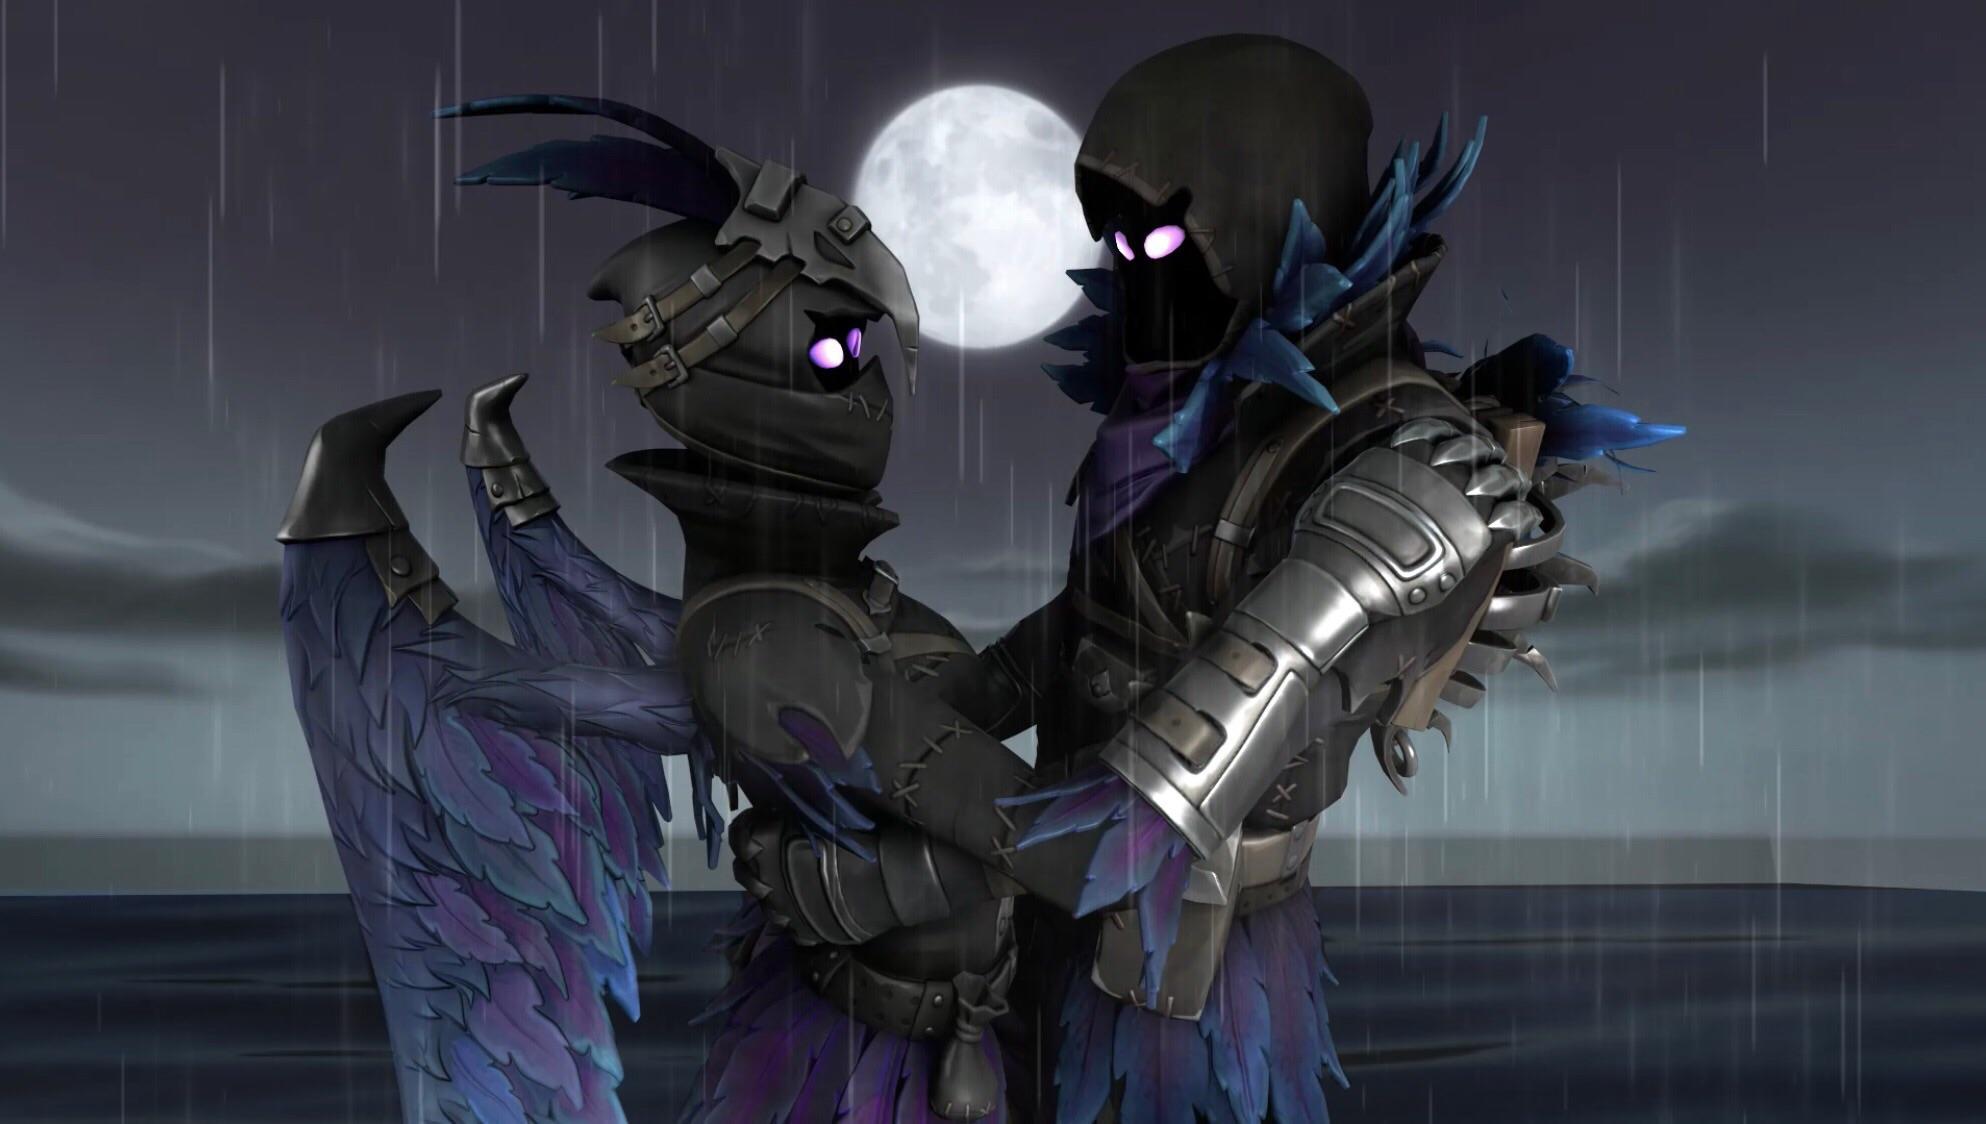 Wallpaper I made for myself of Ravage and Raven.. Feedback welcome